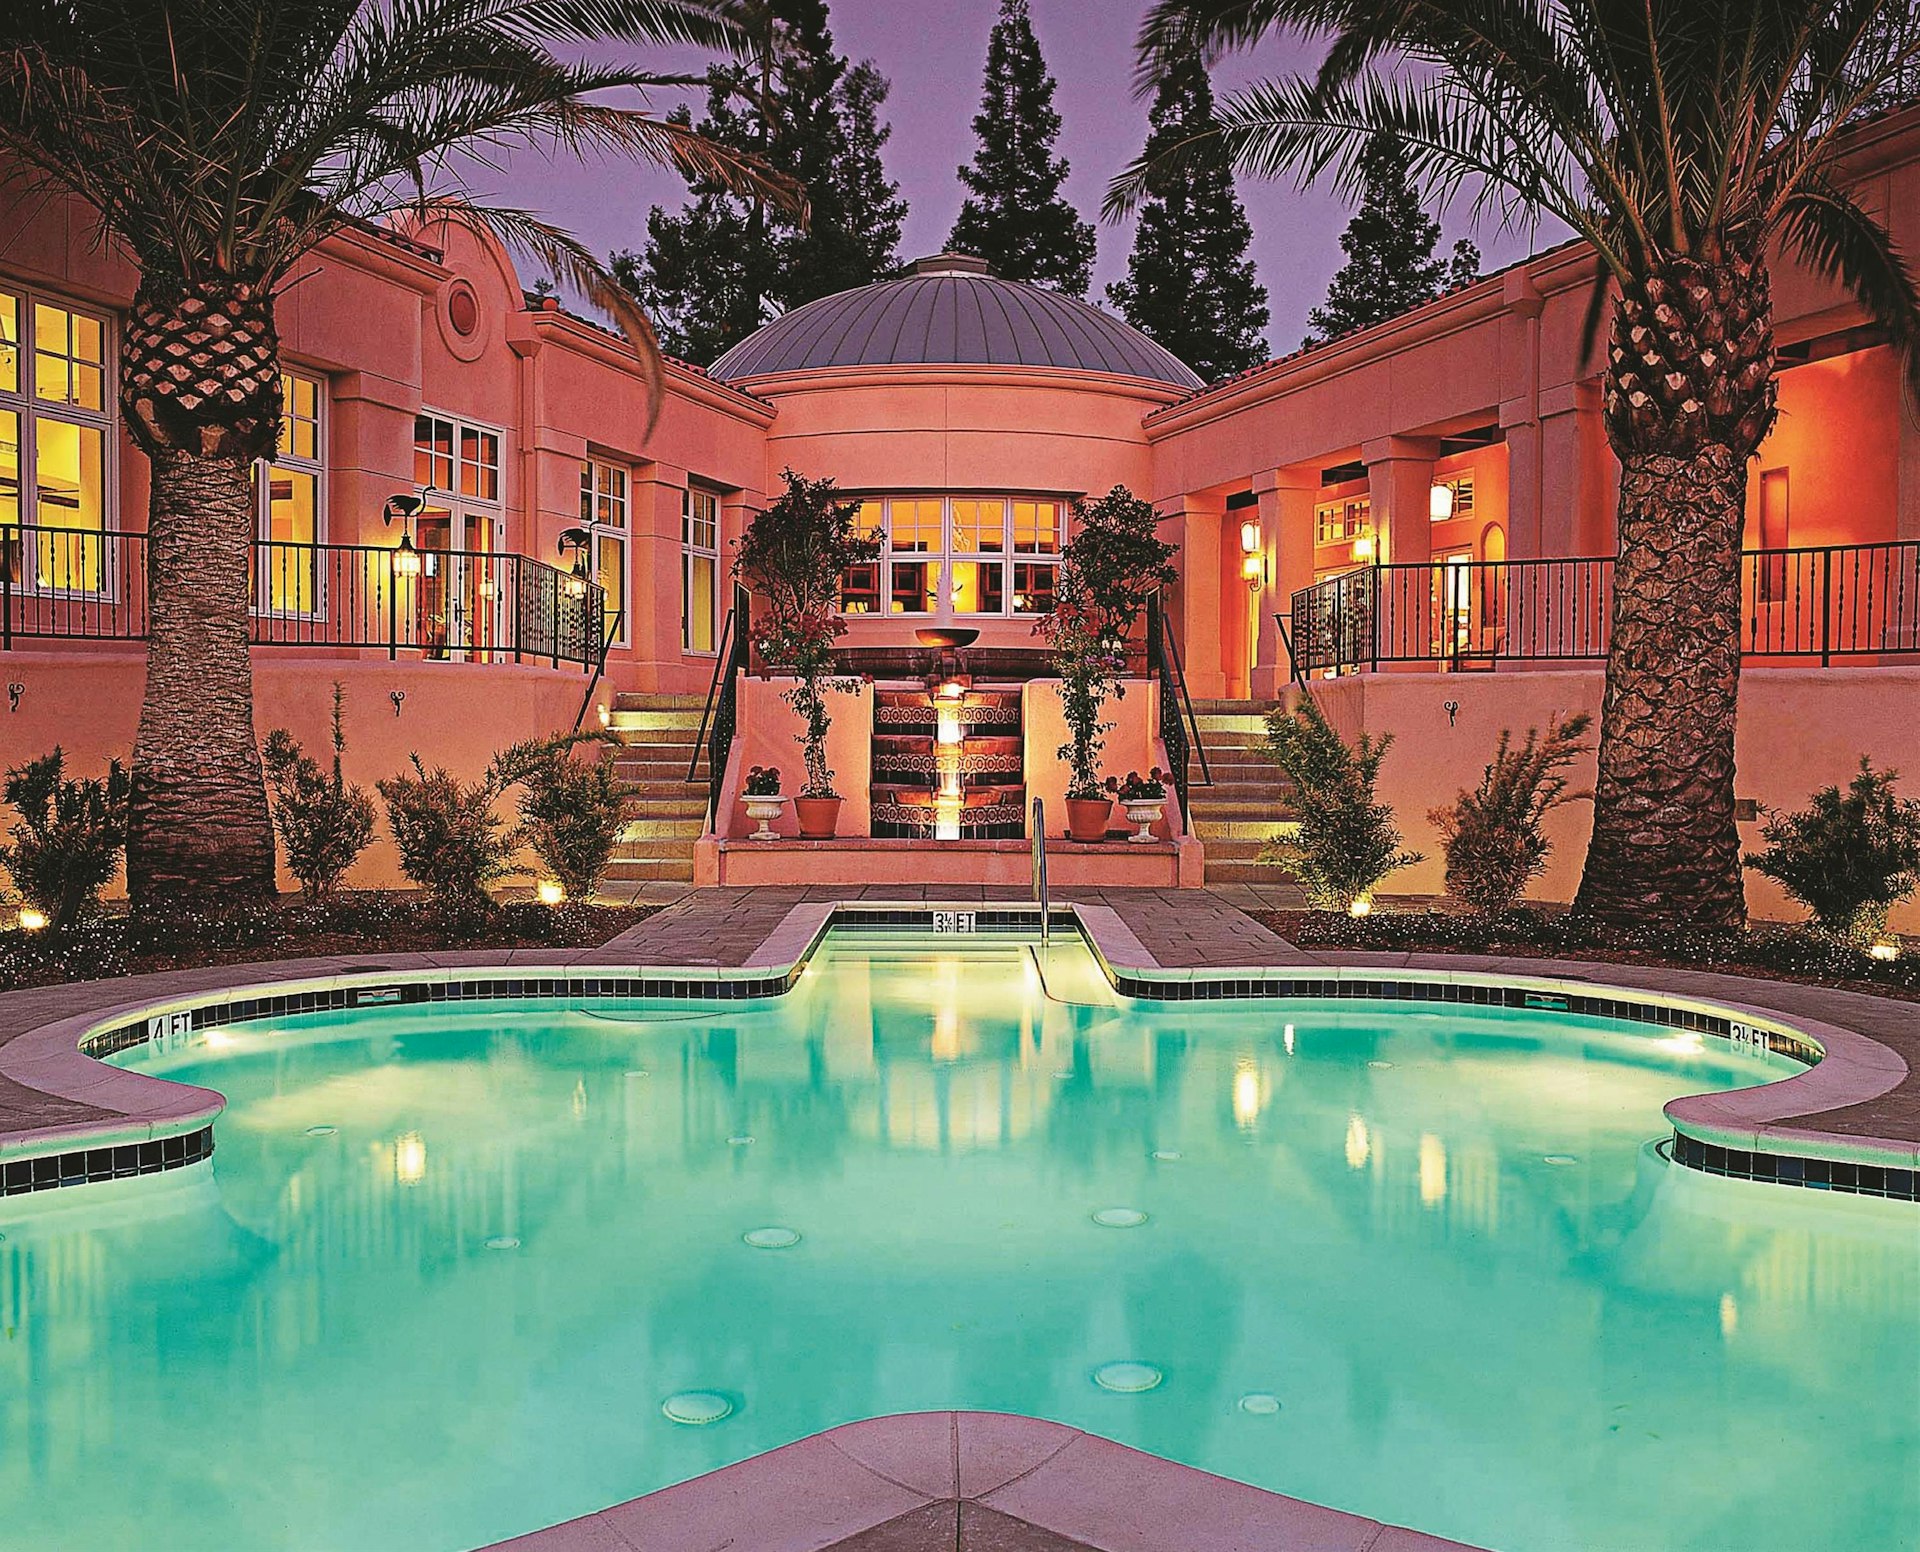 An empty pool surrounded by palm trees